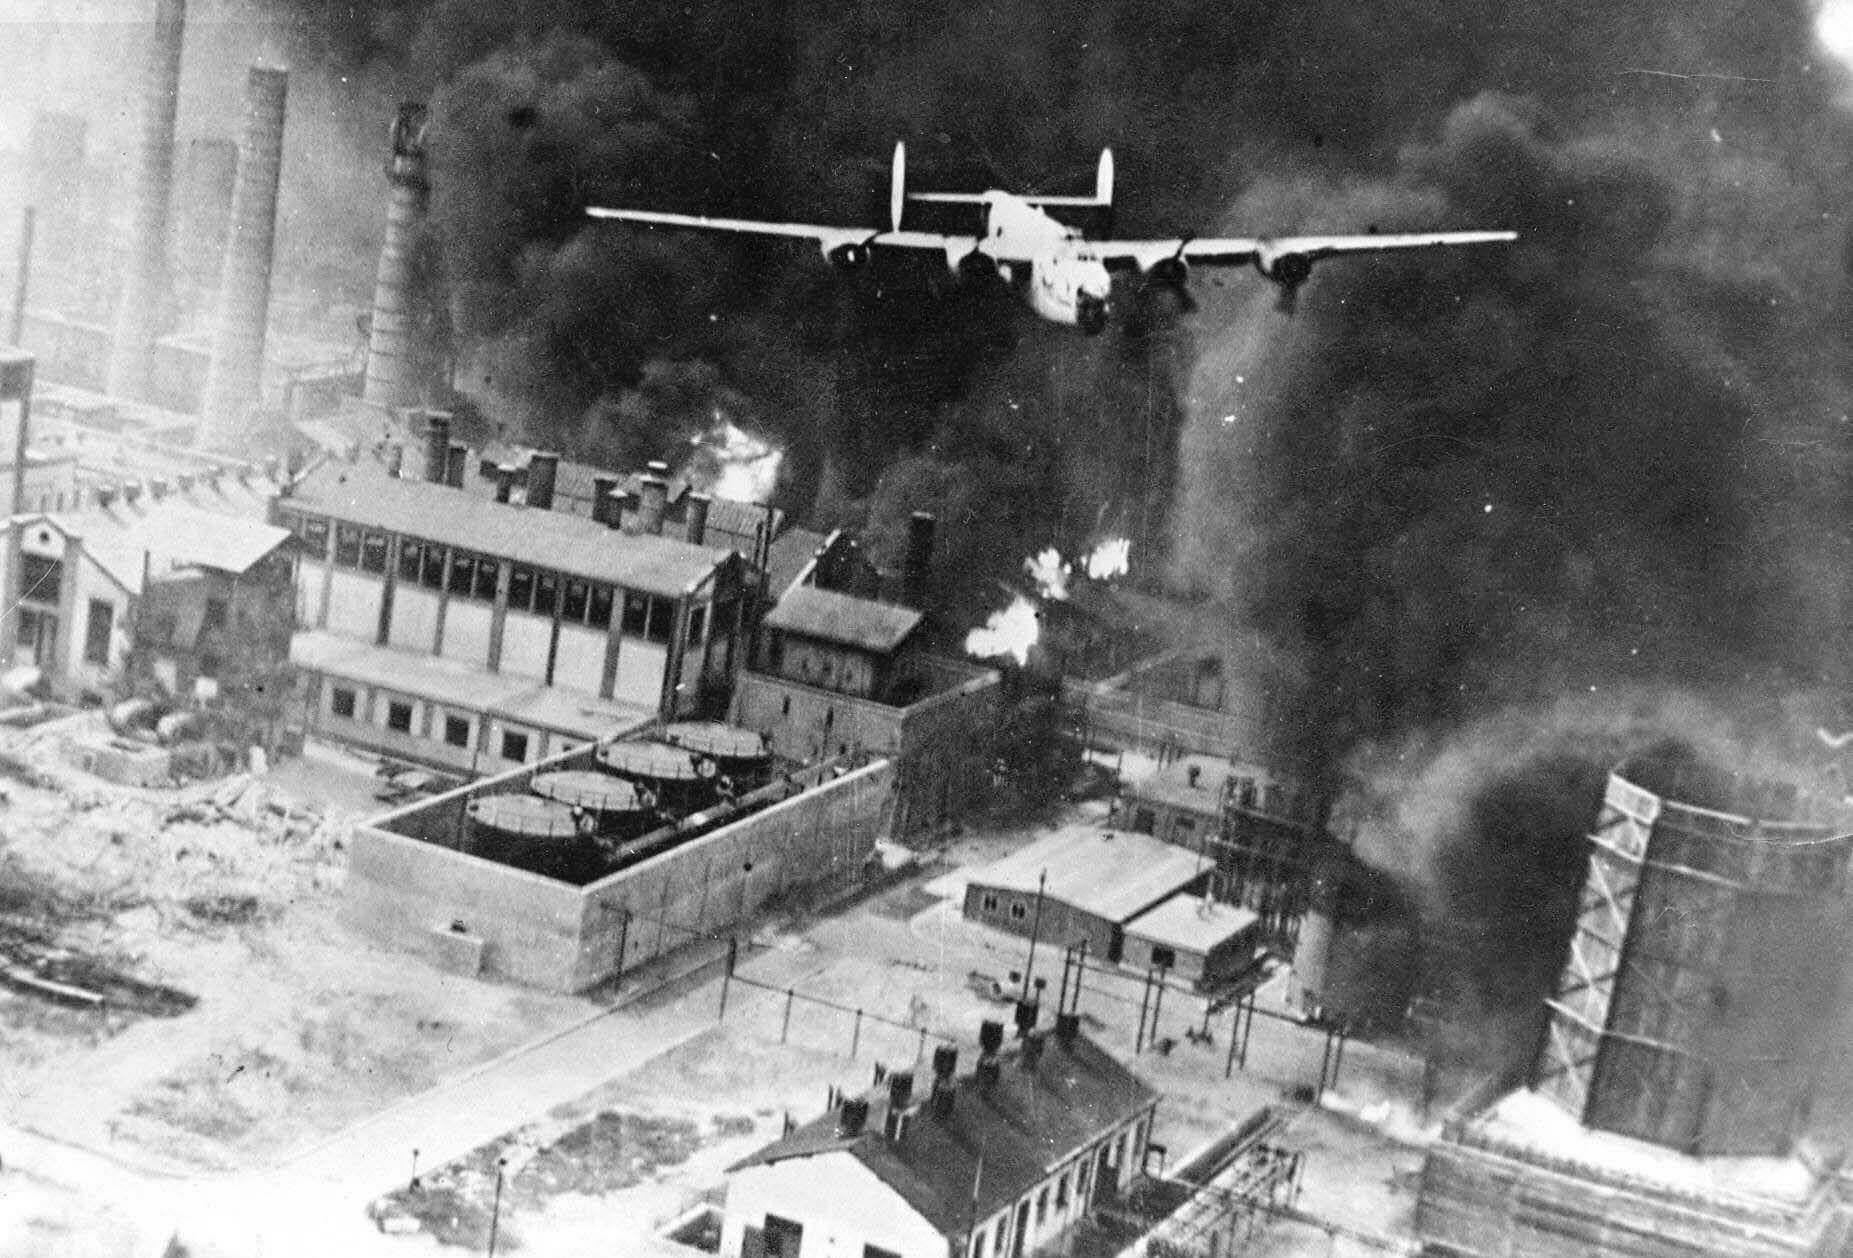 Public photo from the 44th Bomb Group Collection
A U.S. bomber nicknamed “Sandman” soars over an enemy fuel refinery in Romania on Aug. 1, 1943. Larry Lancashire was part of this U.S. mission and was shot down and captured.